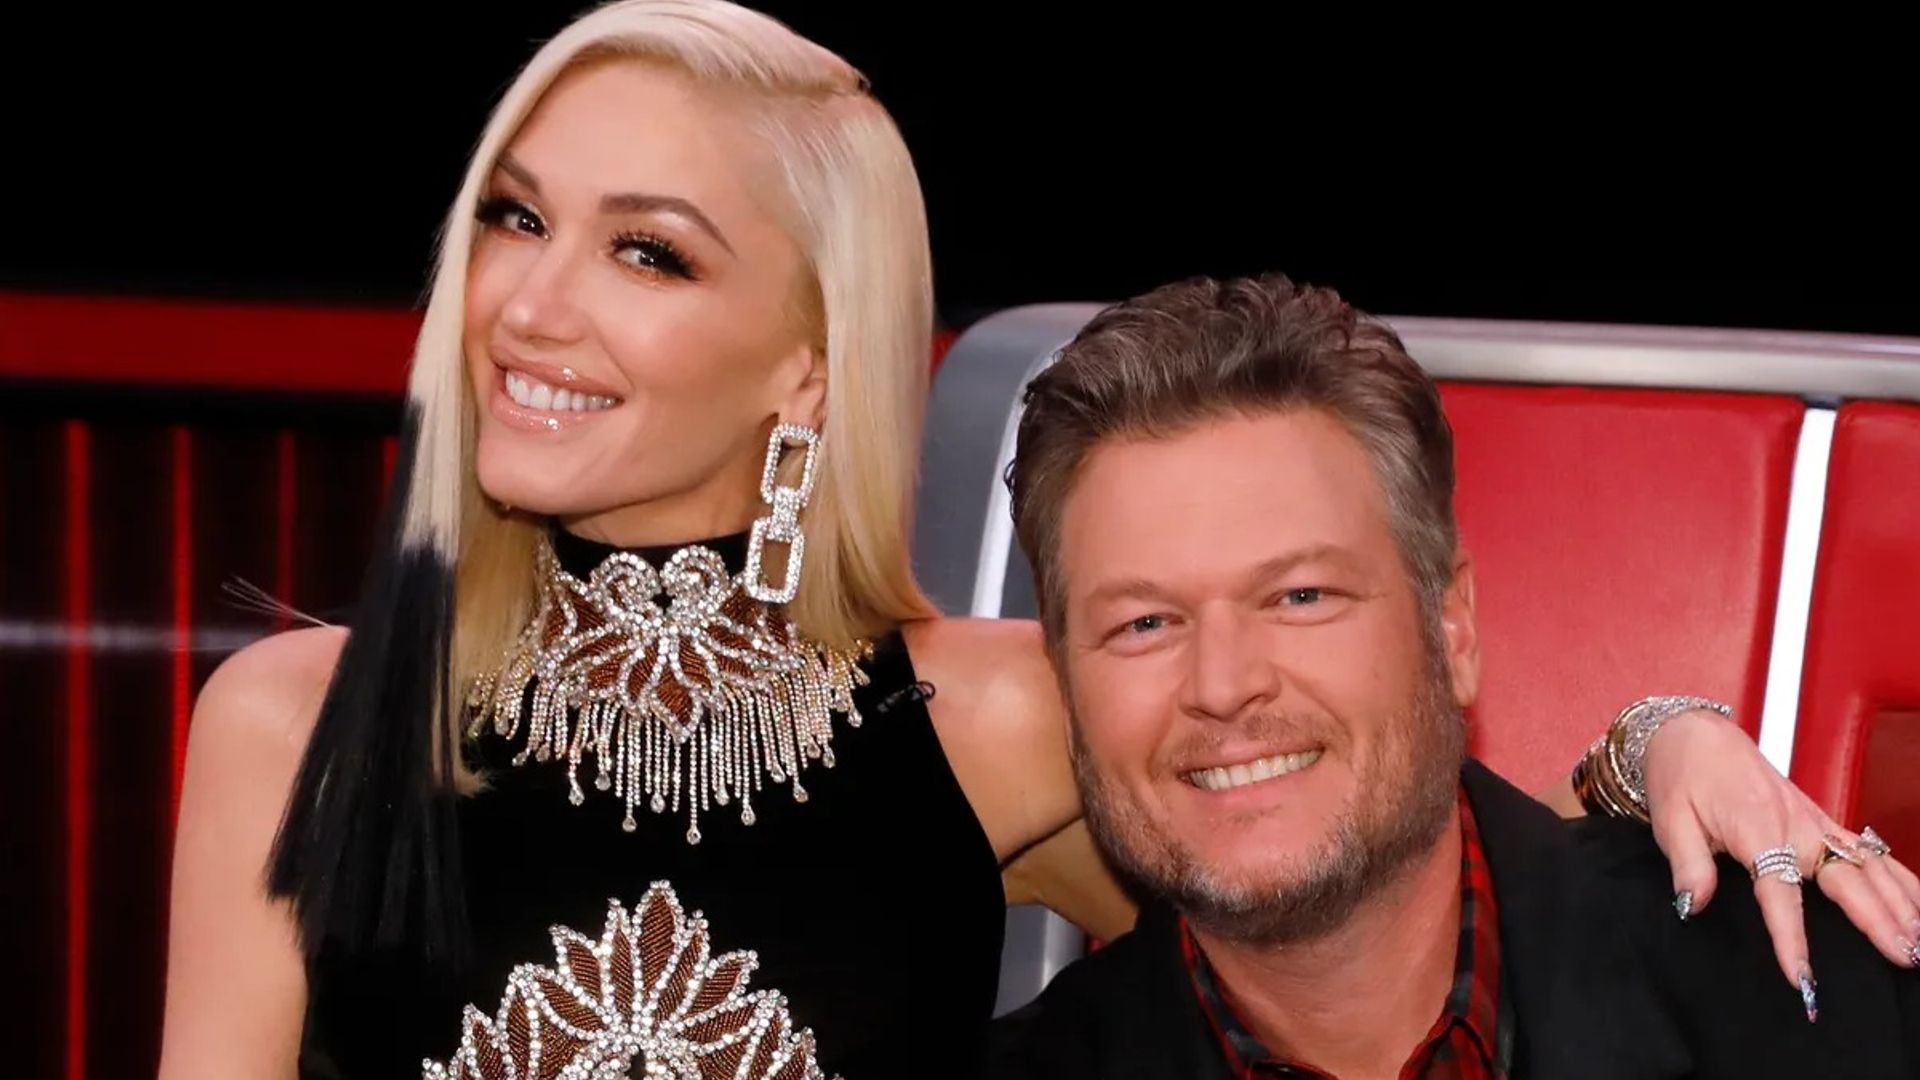 Raelynn shares the sweet gift Gwen Stefani and Blake Shelton sent after the birth of her baby girl